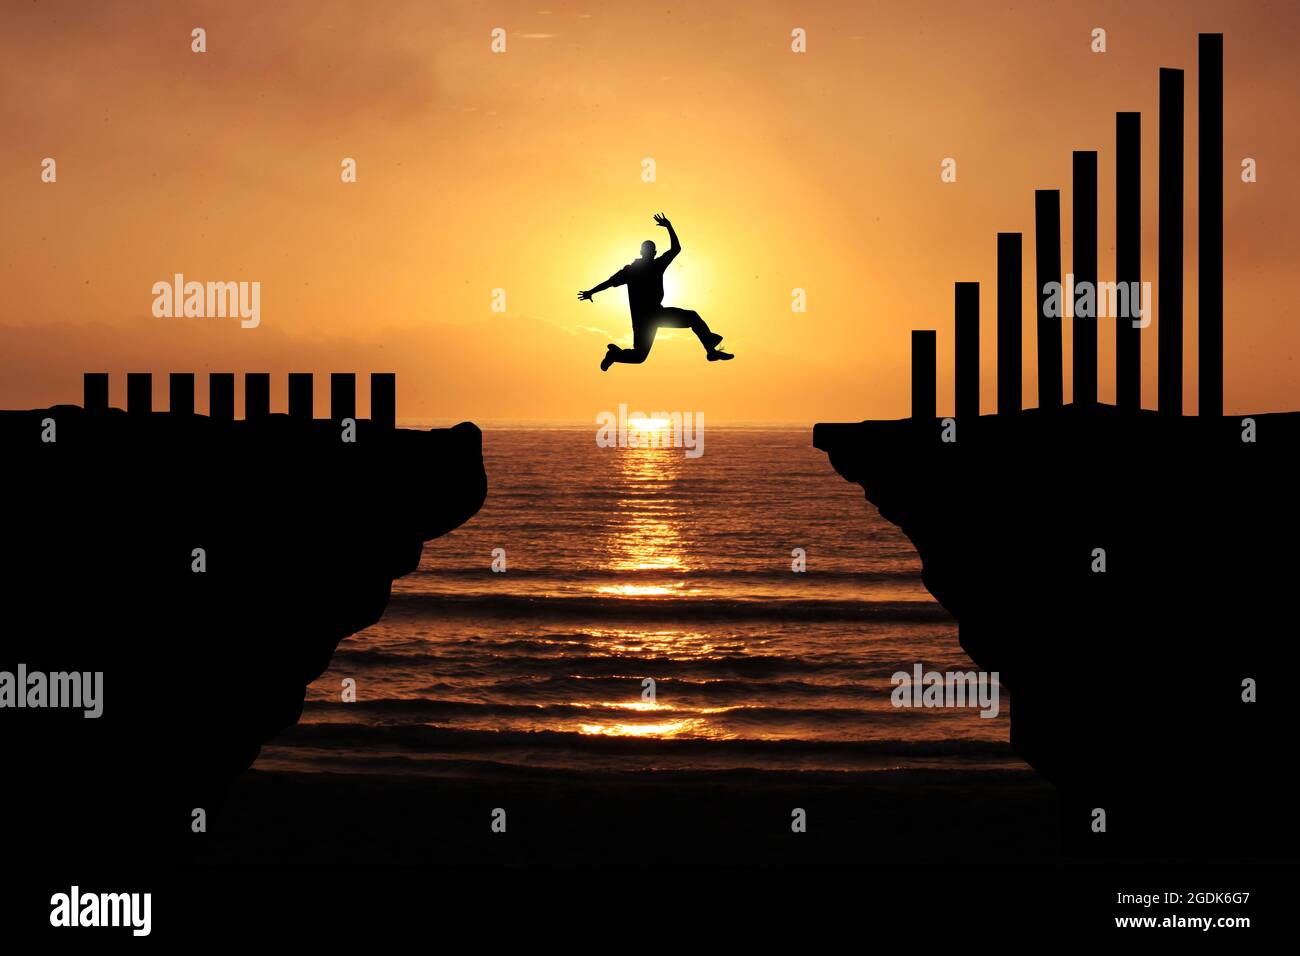 Increase earning and productivity By taking a big risk. Silhouette of a business man jumping over the cliff to attempt More profit and rise more. Stock Photo